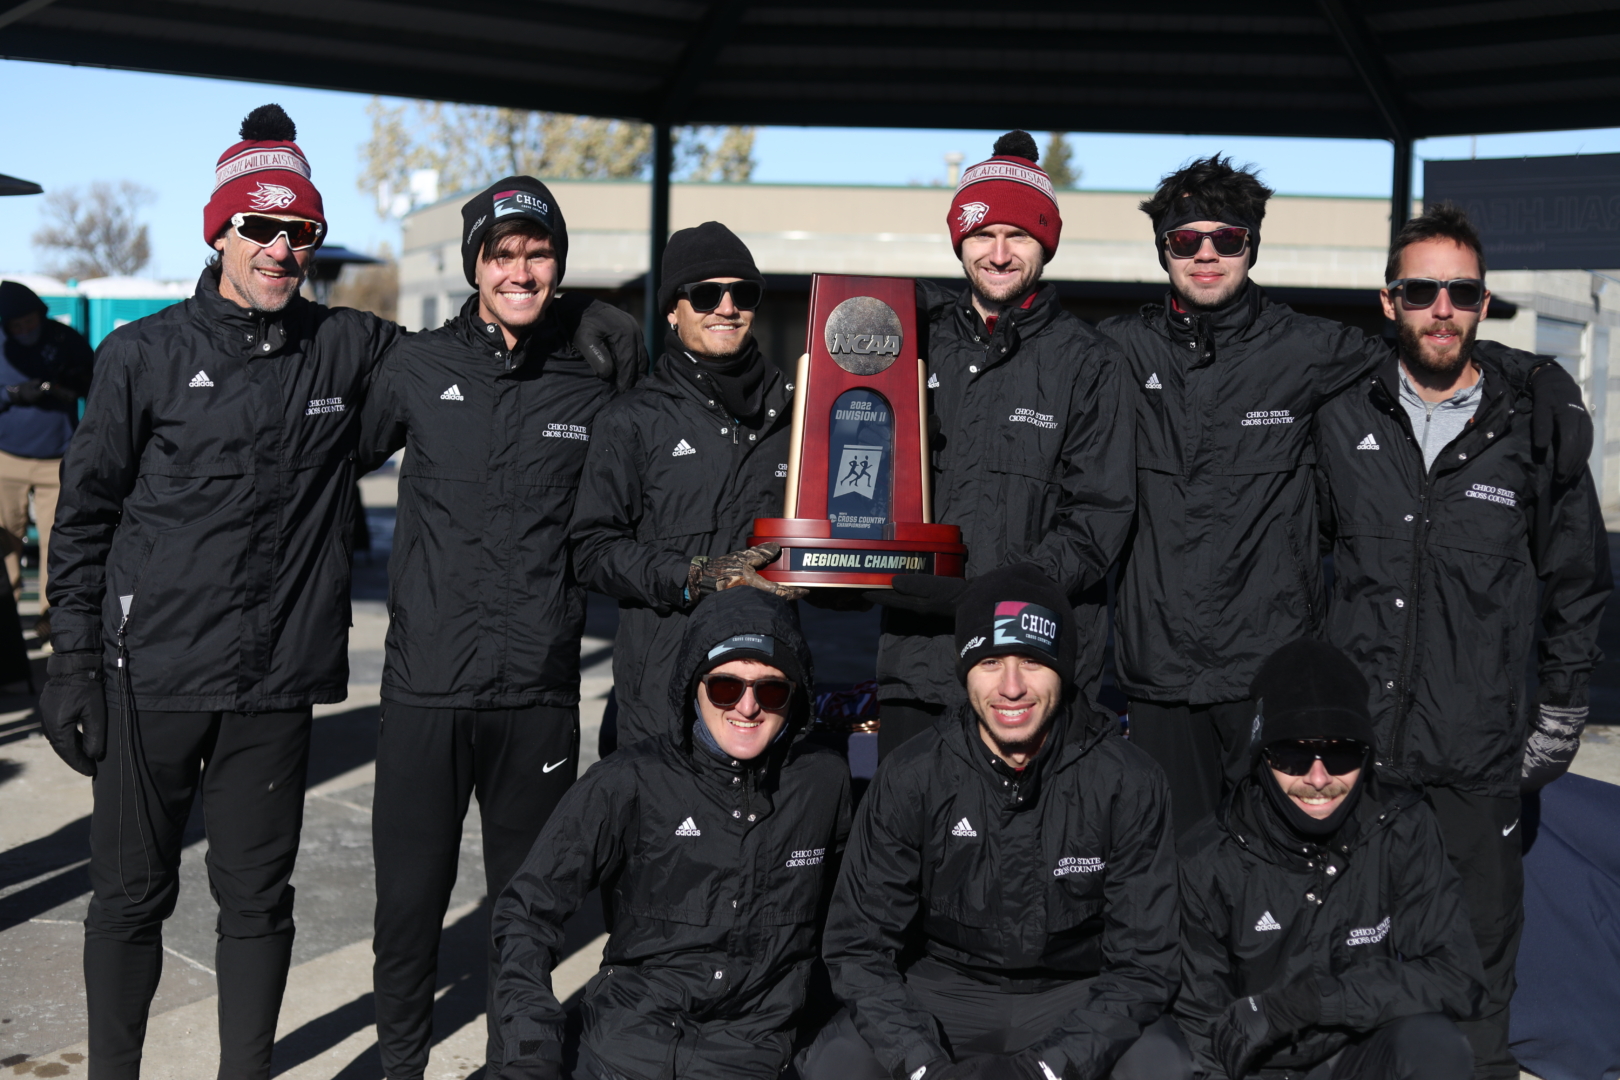 Rory Abberton (middle) helps hold the NCAA West Regional Championship trophy as he and his teammates pose.